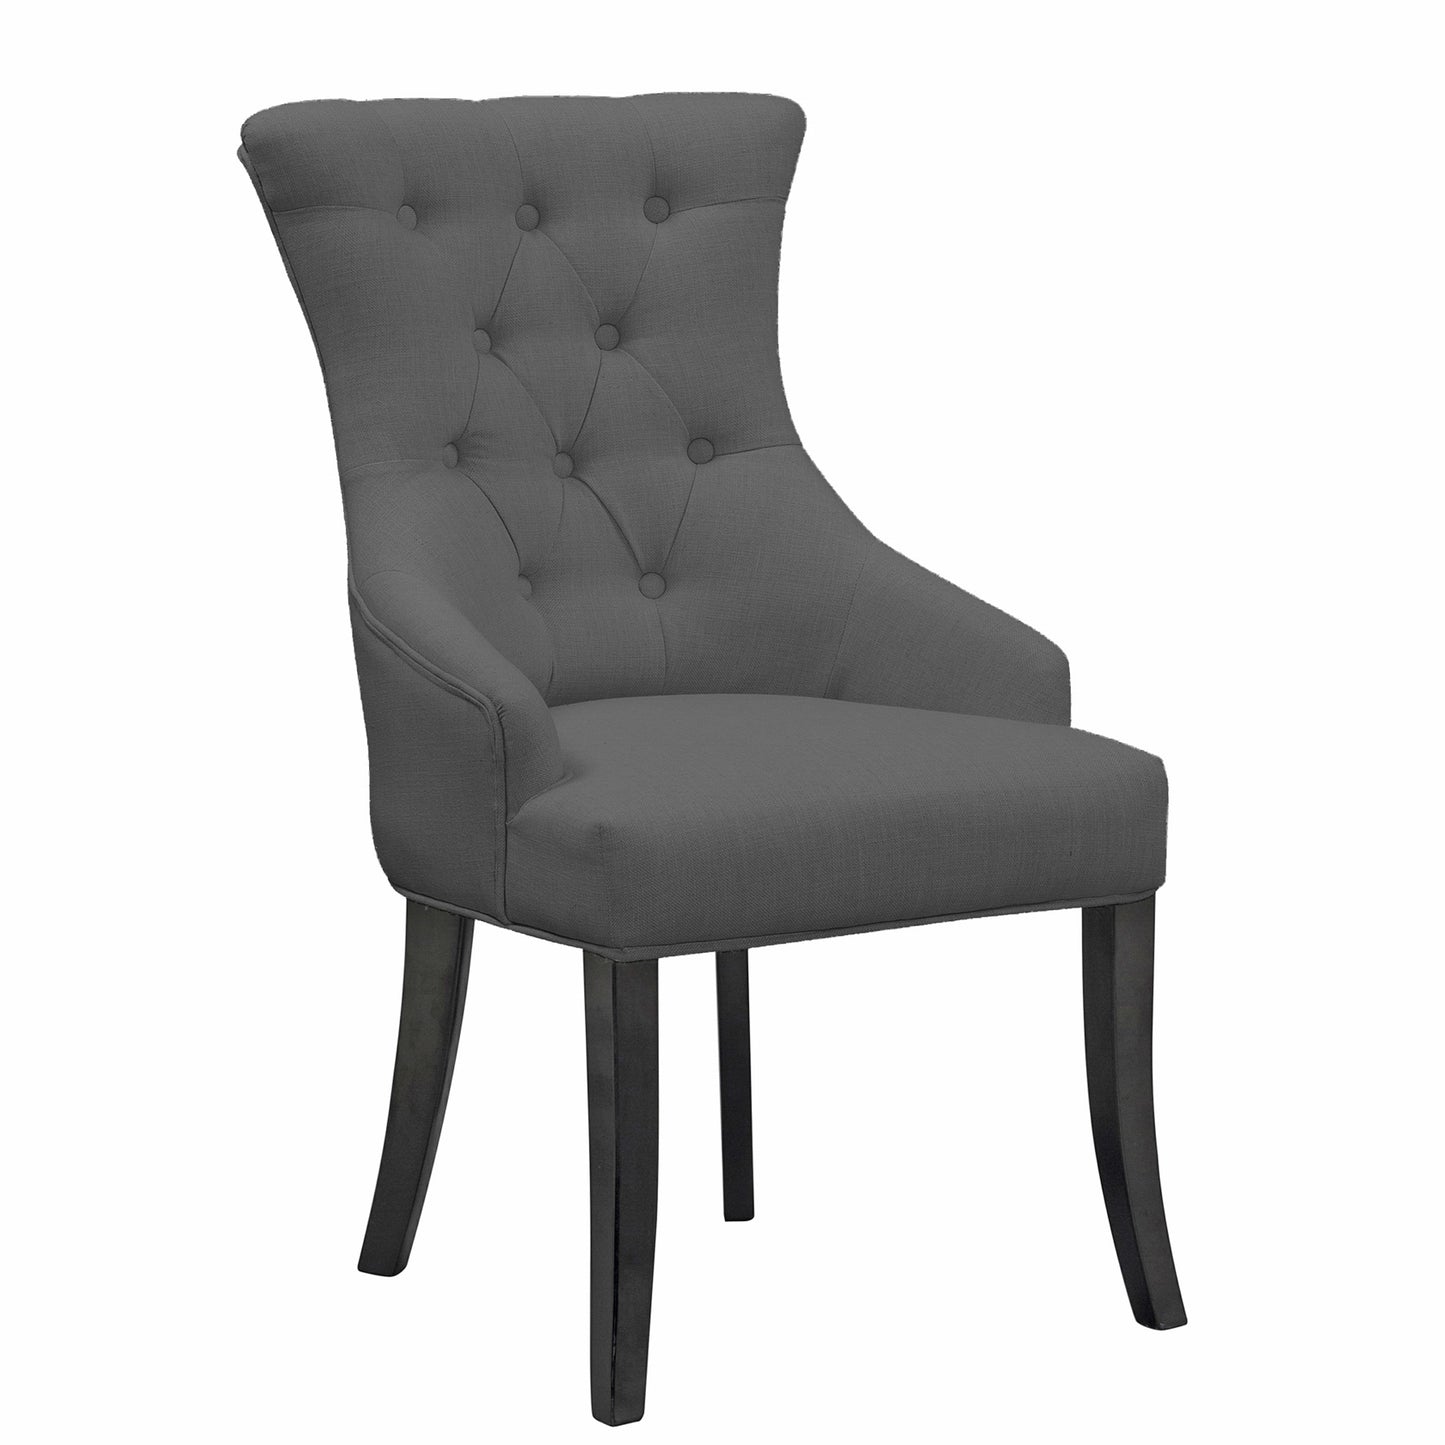 Set of 2 Alei Grey Fabric Dining Chair Wing Chair with Tufted Buttons